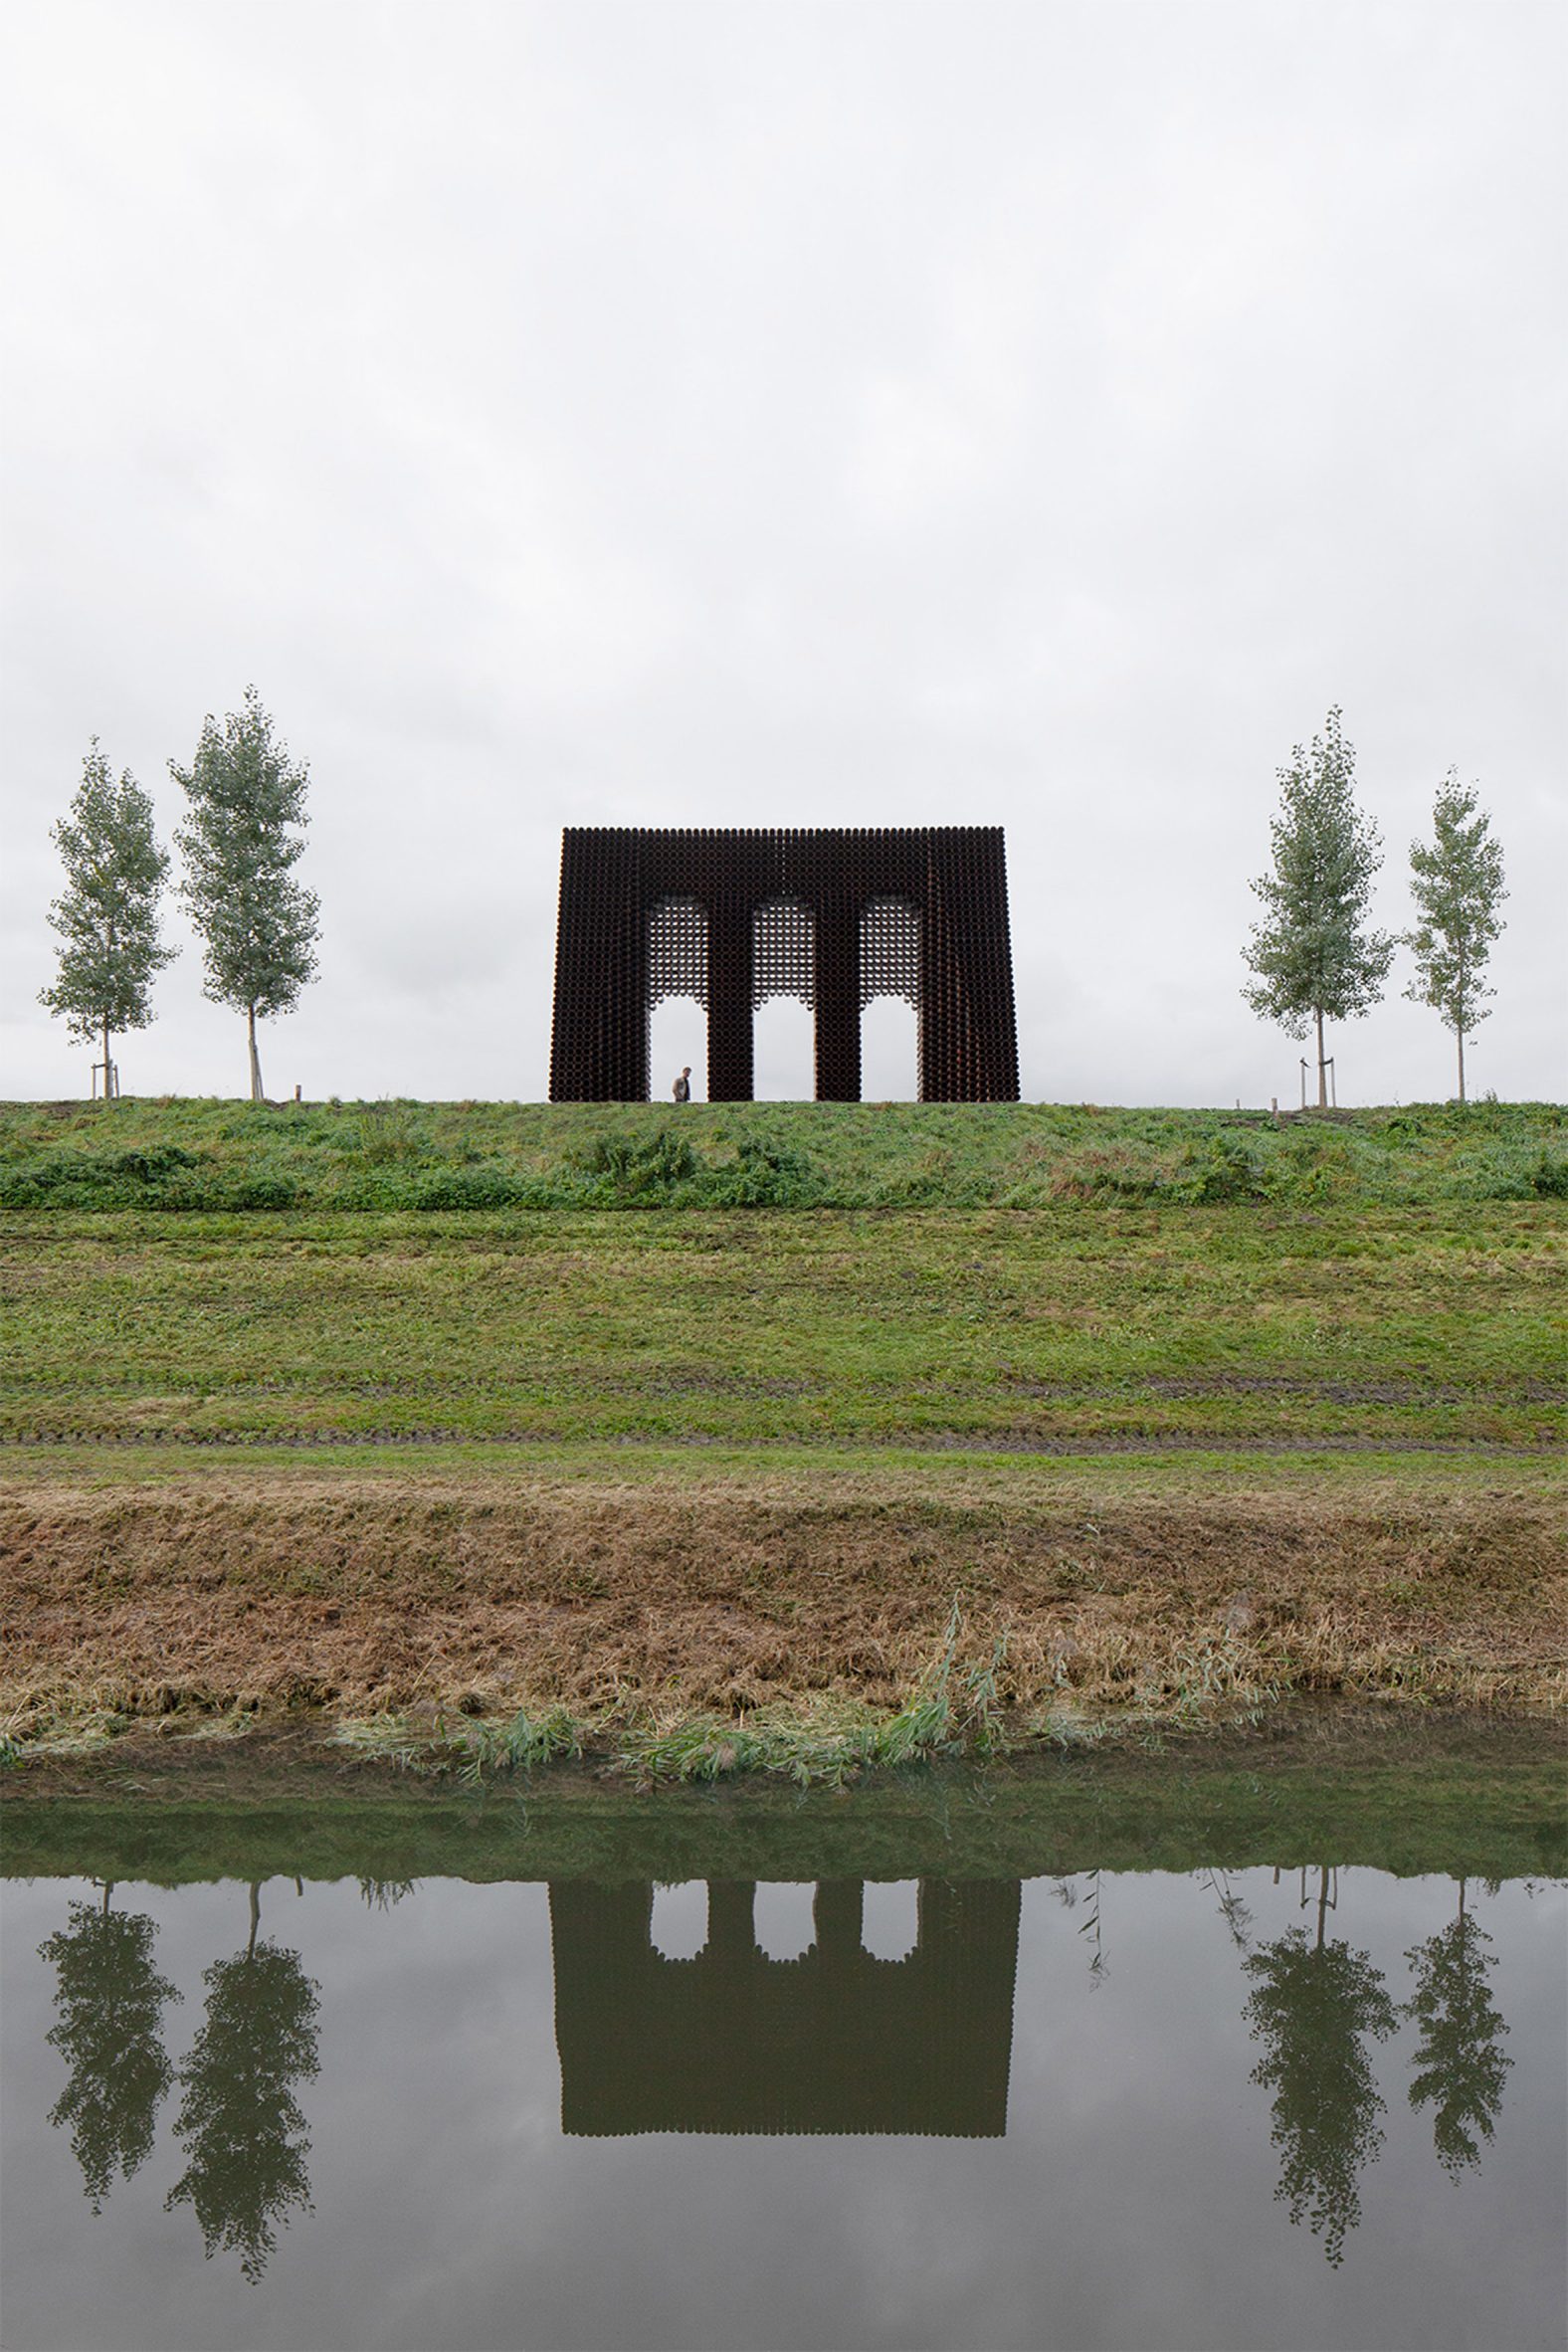 The Waterline Monument by Gijs Van Vaerenbergh is on top of a bank